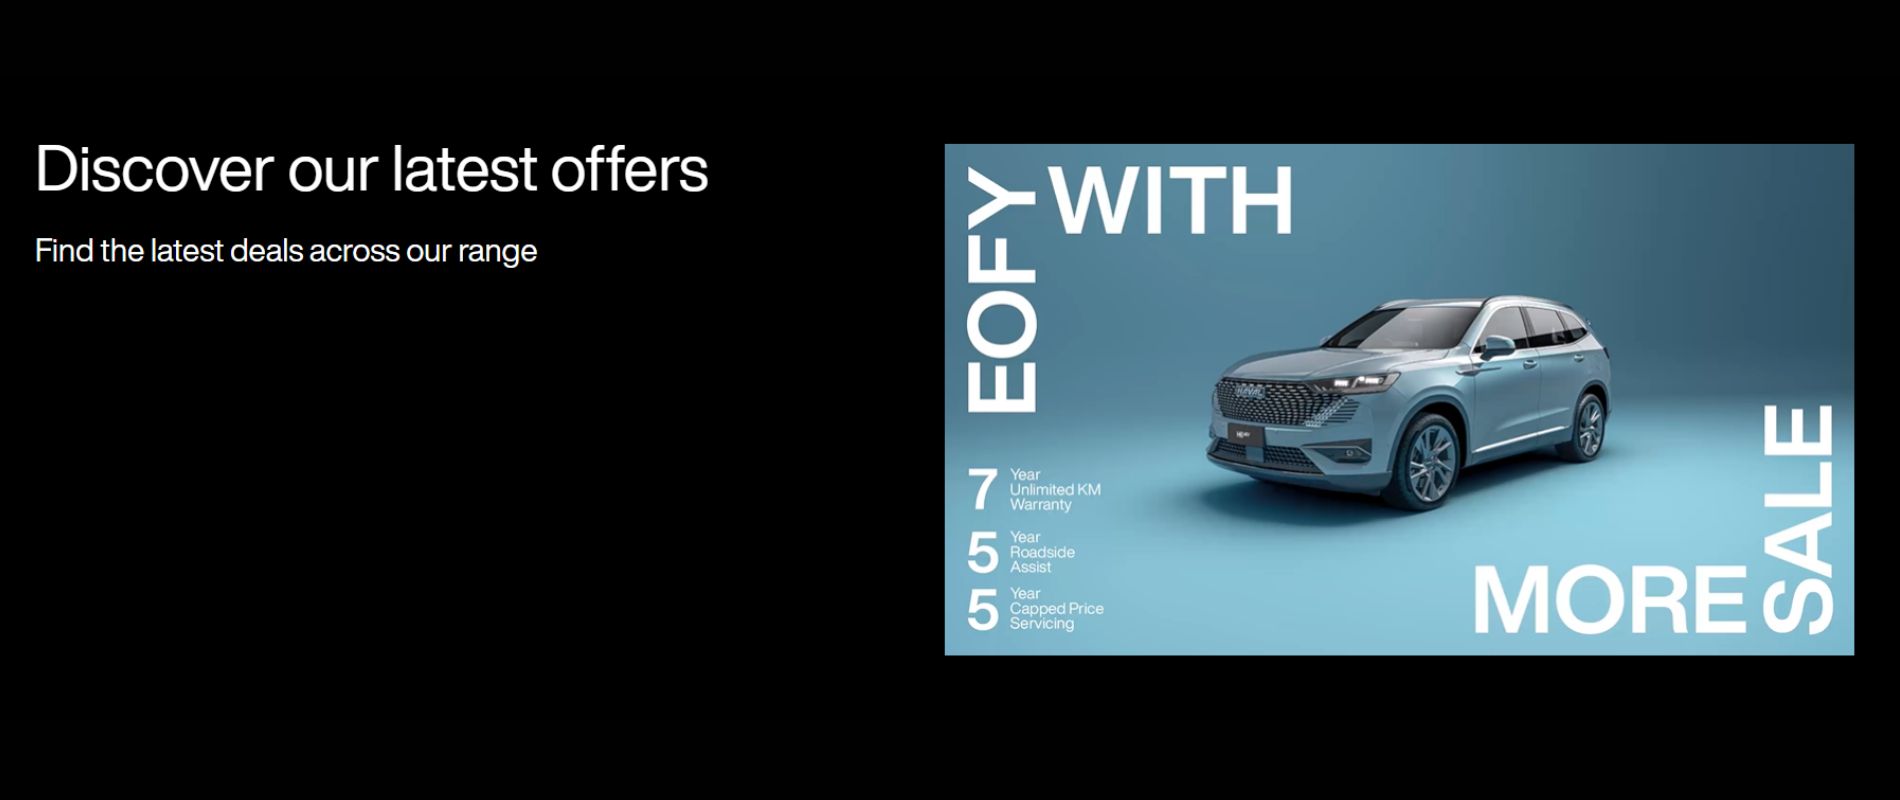 Discover our latest offers. Find the latest deals across our range